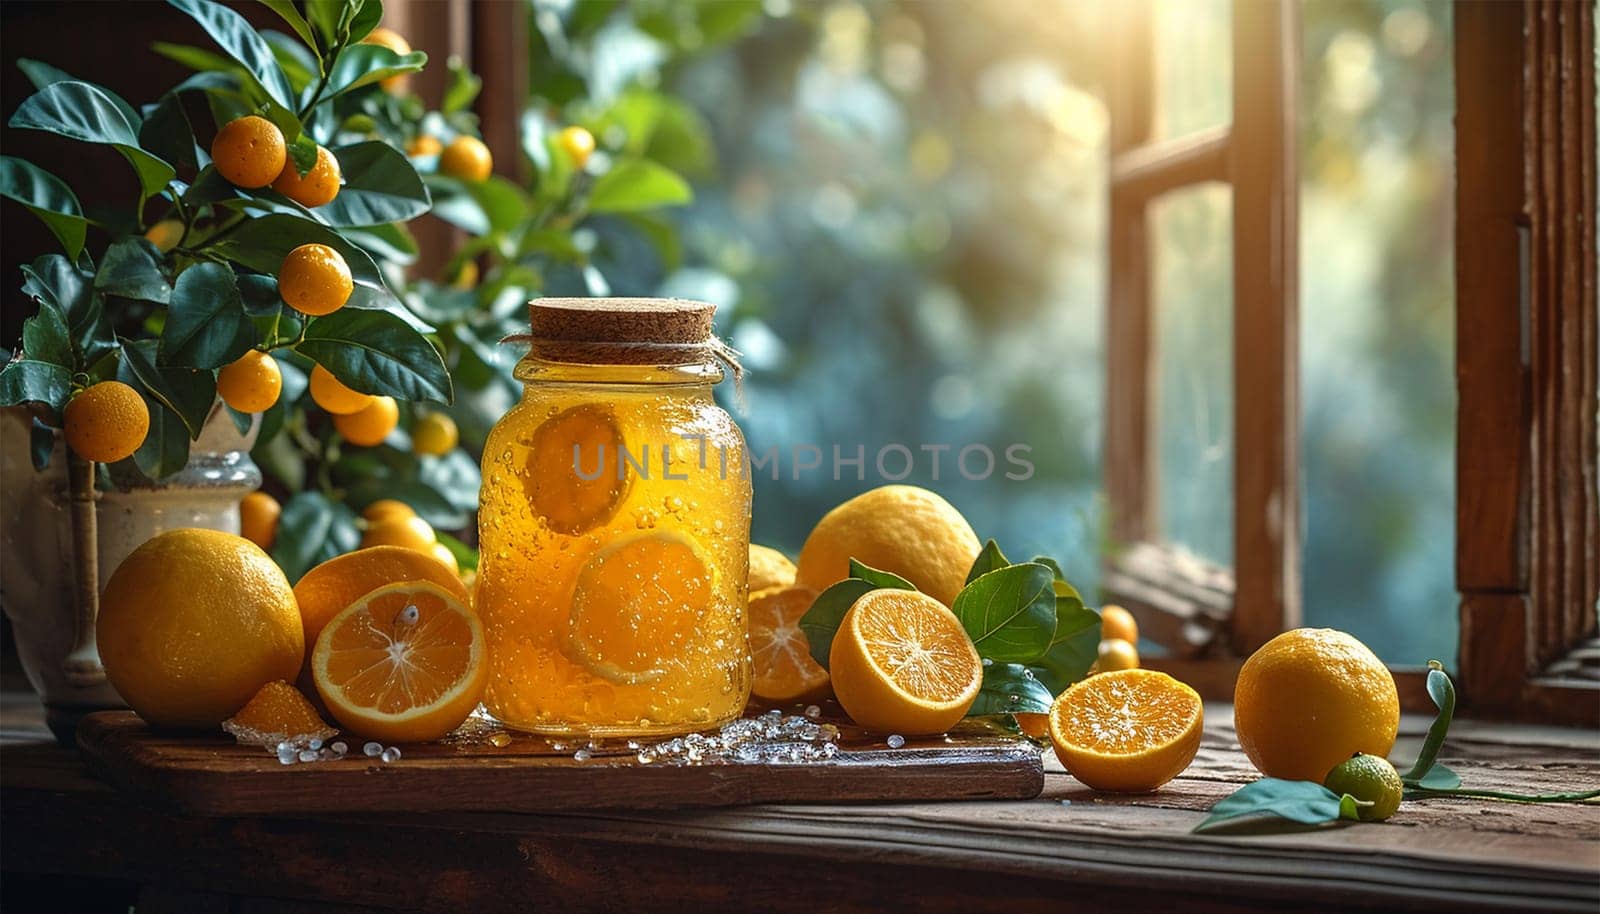 Homemade orange marmalade on wooden table. Seville Orange, Sour Orange, Bitter Orange, Marmalade Orange - native Southeast Asia tropical fruit. Homemade Tasty Jam on white background. Healthy Food. Copy space